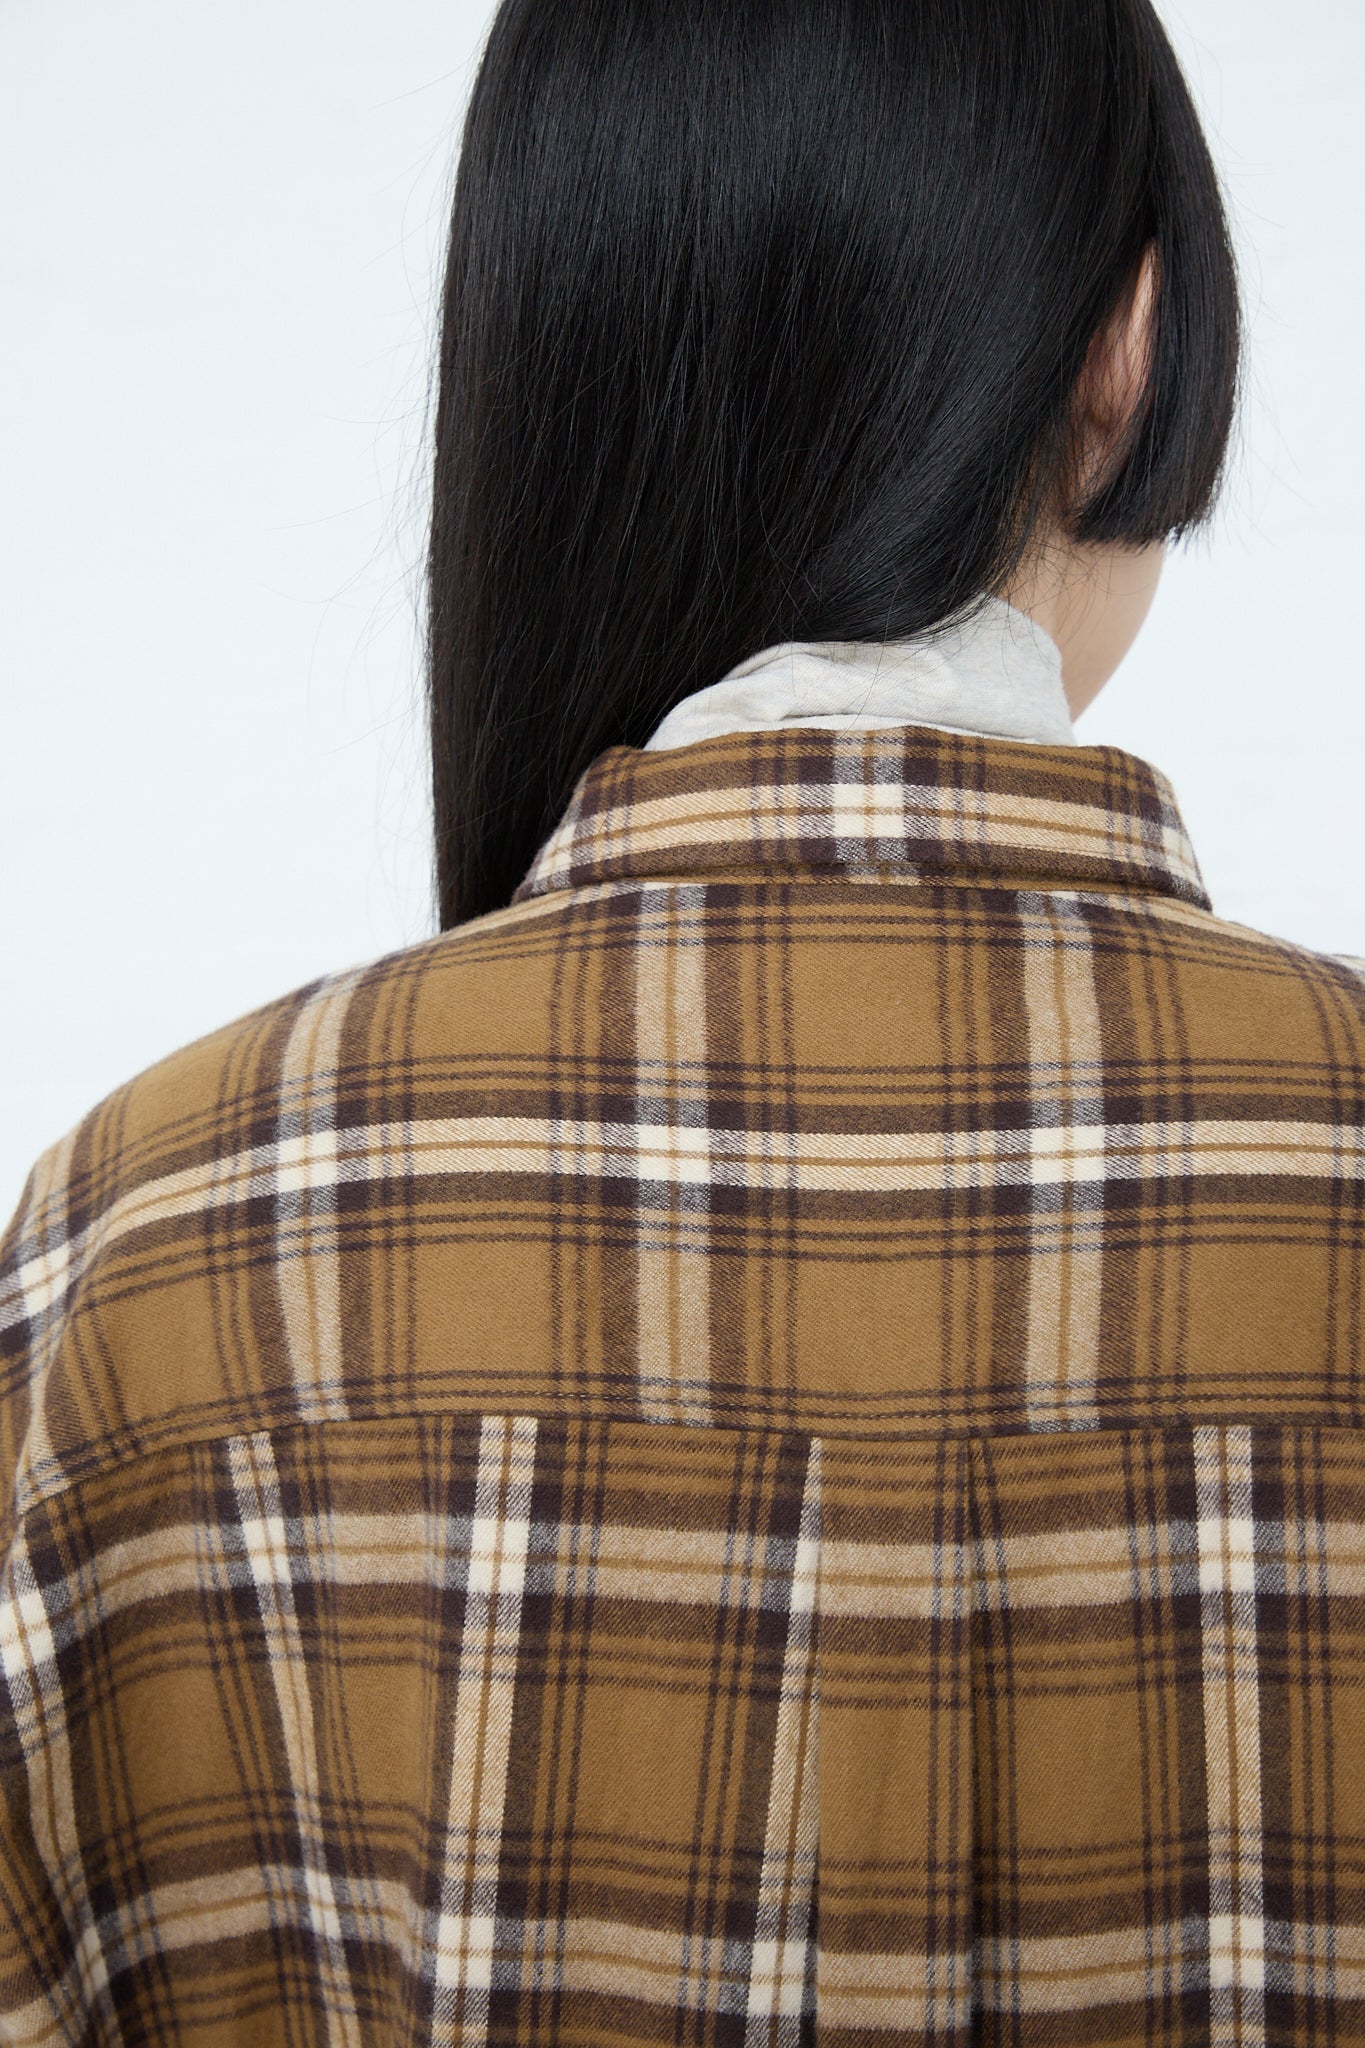 The back view of a woman wearing an Ichi Woven Cotton Dress in Camel. Up close.